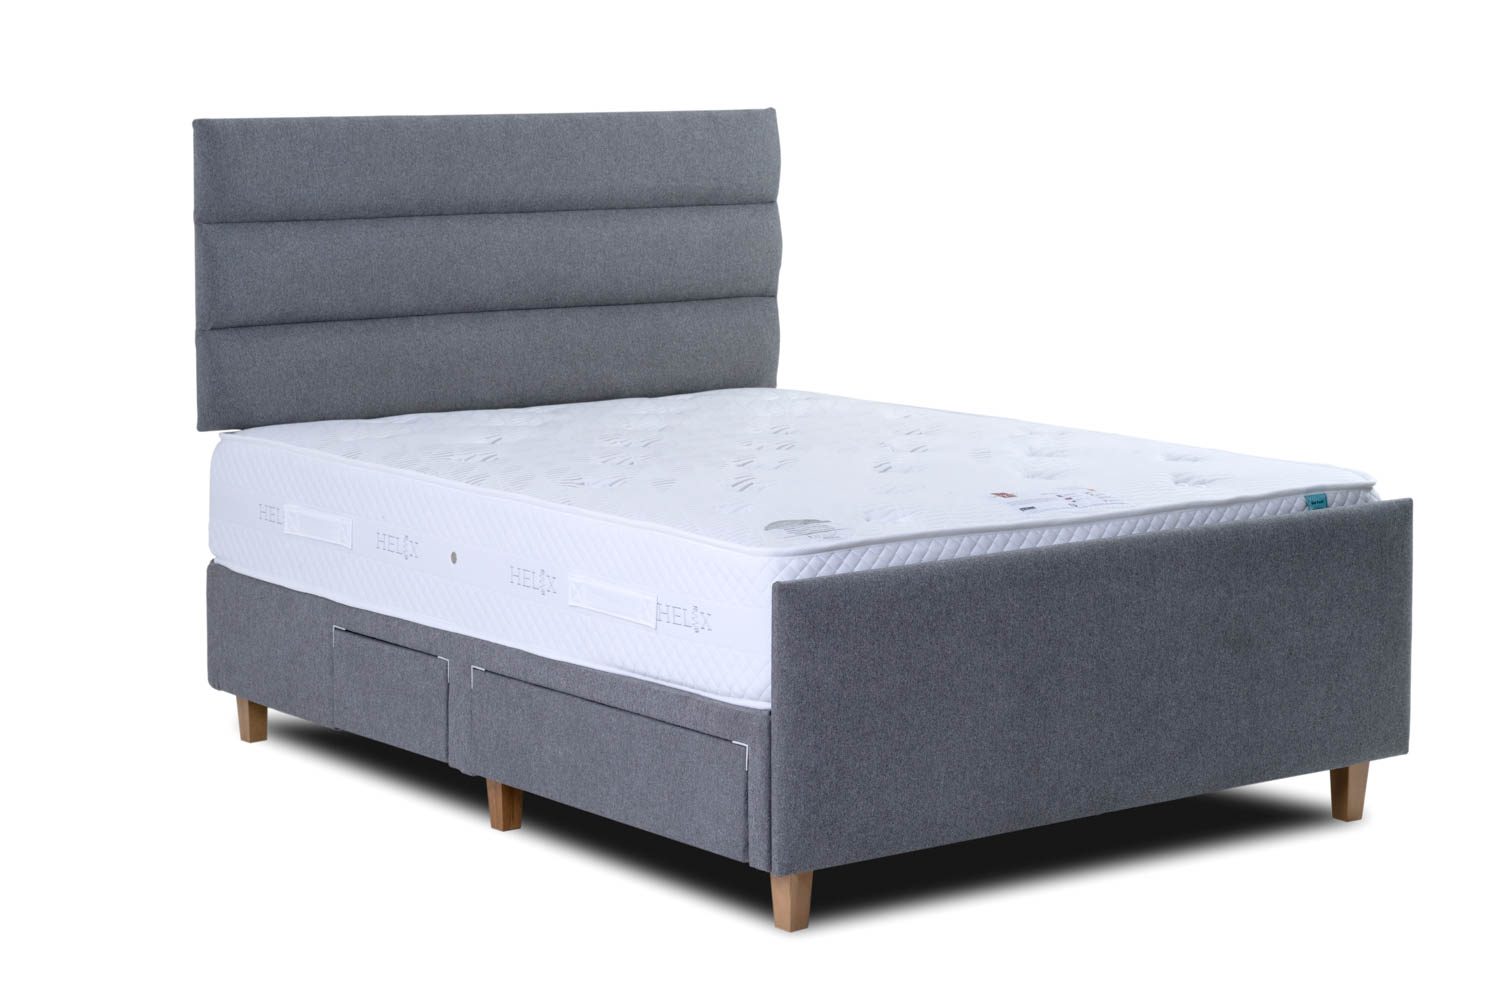 Vogue Newlyn Upholstered Fabric Storage Bed Frame